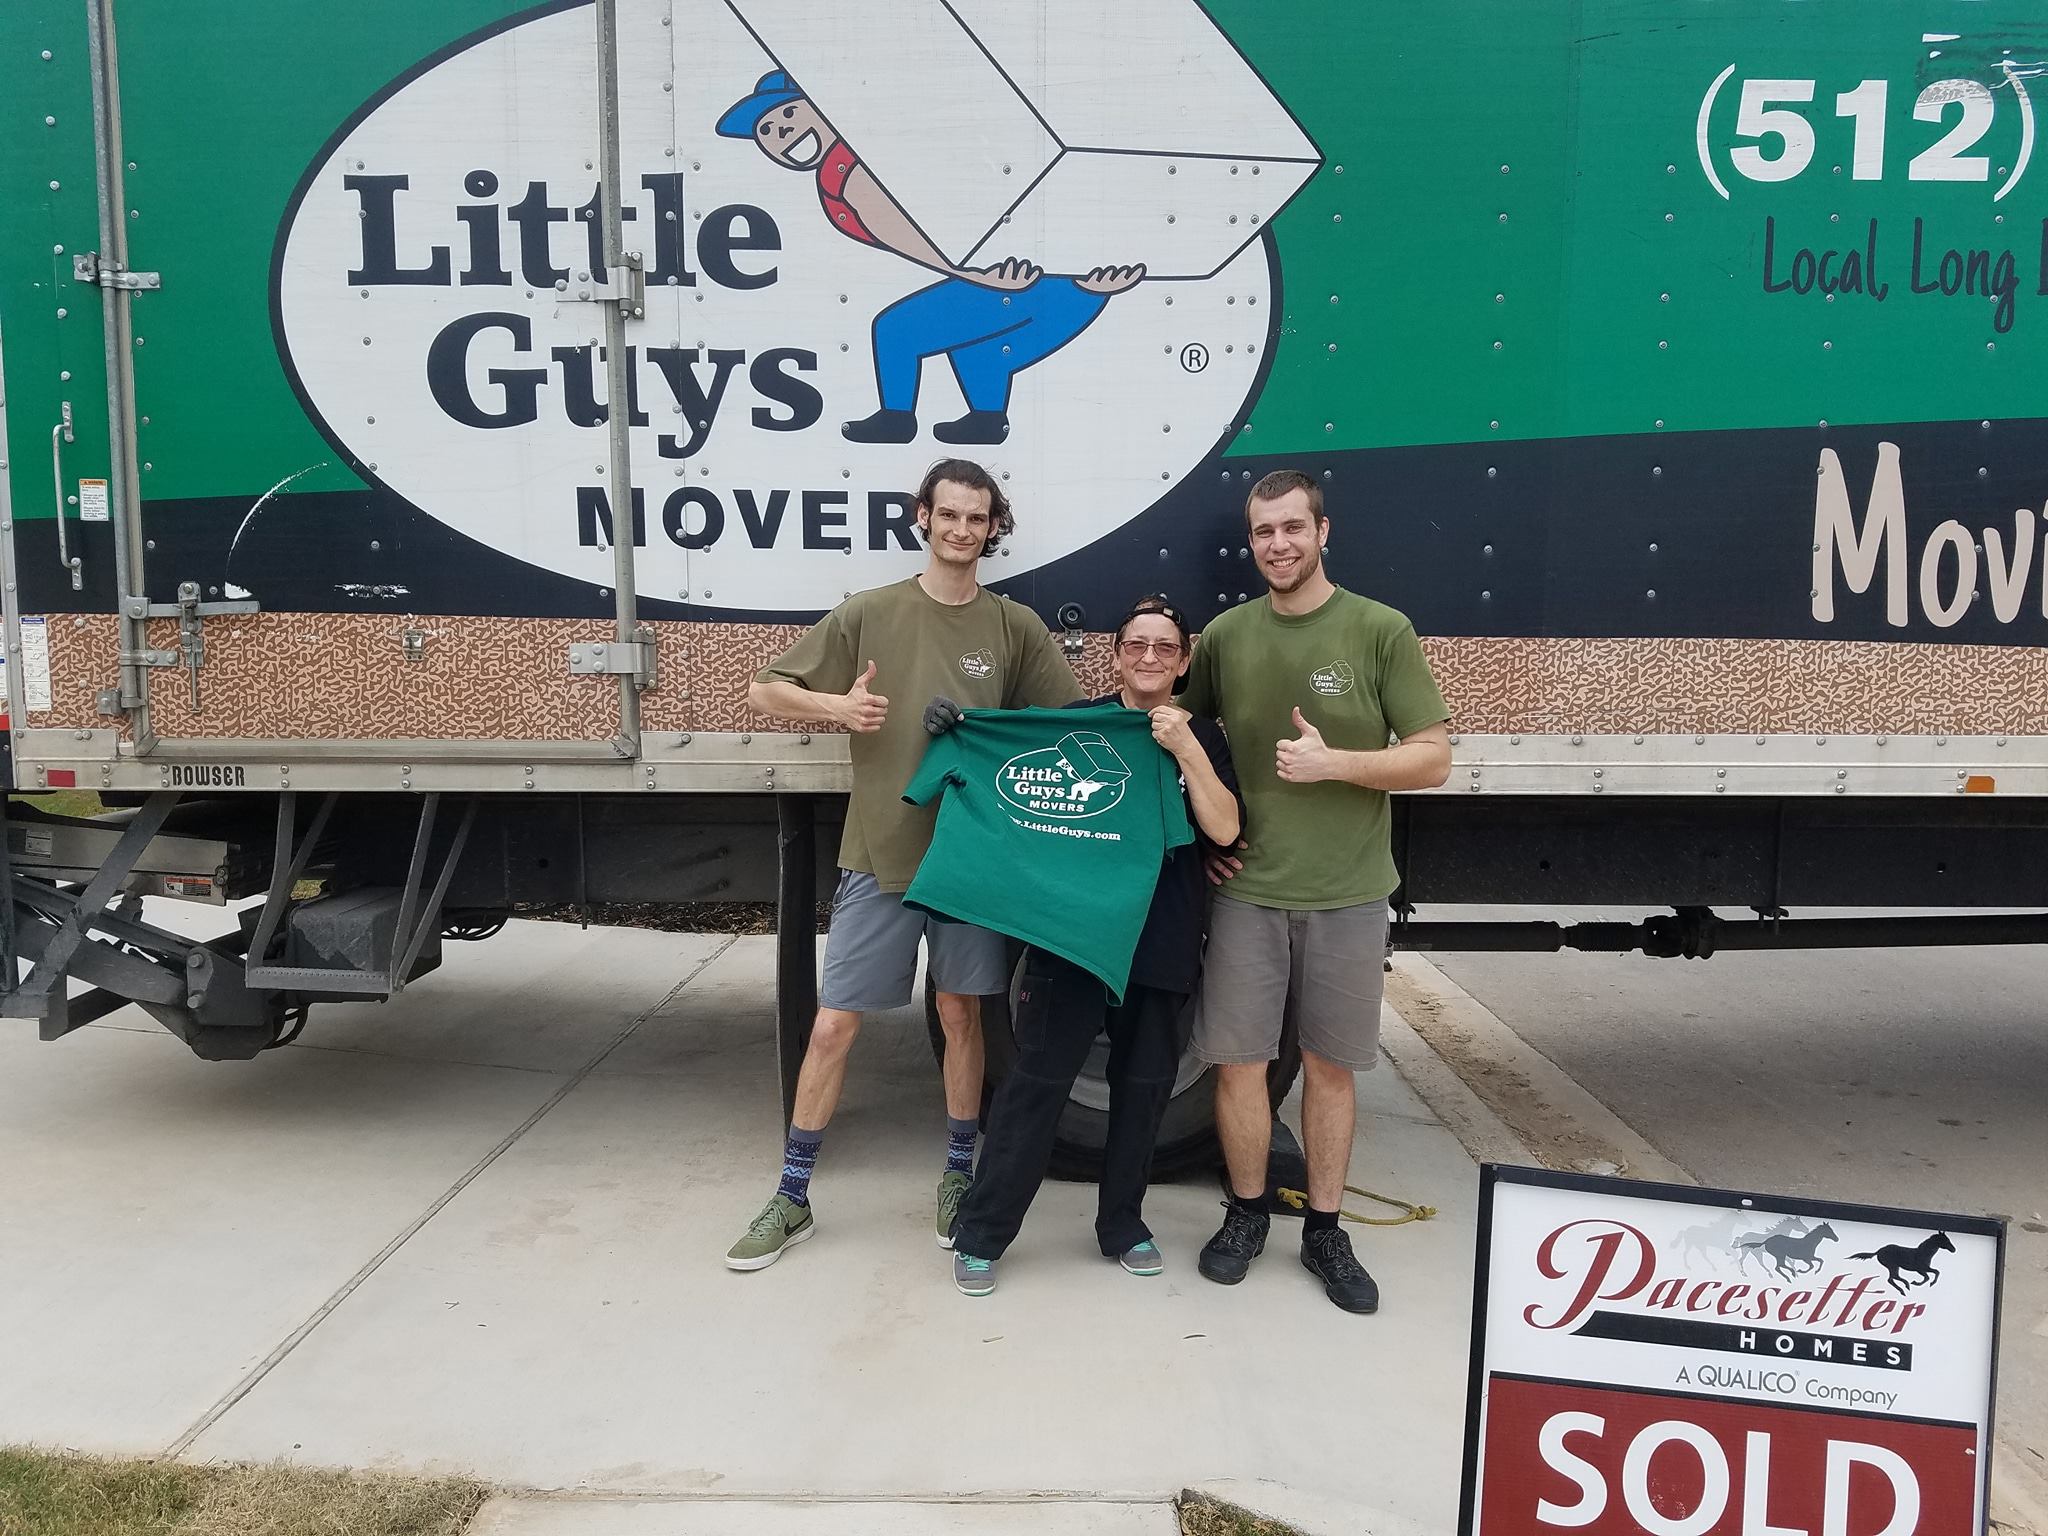 san marcos little guys movers with customer in front of truck